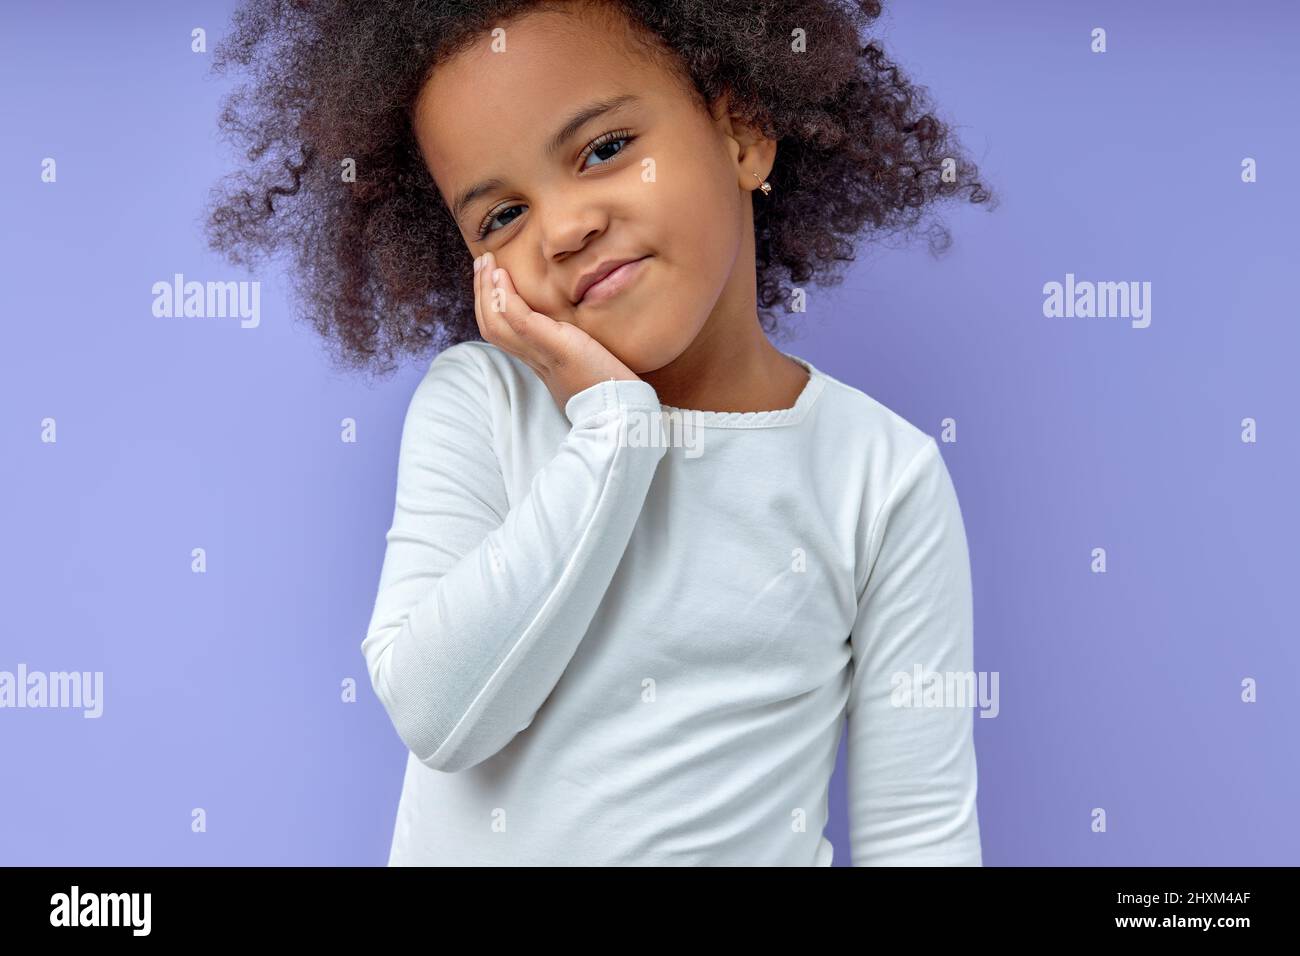 adorable young girl kid keeps hands on cheeks,smiles satisfied,amiably, has fun chatting with friends, wears casual clothes, isolated over purple back Stock Photo